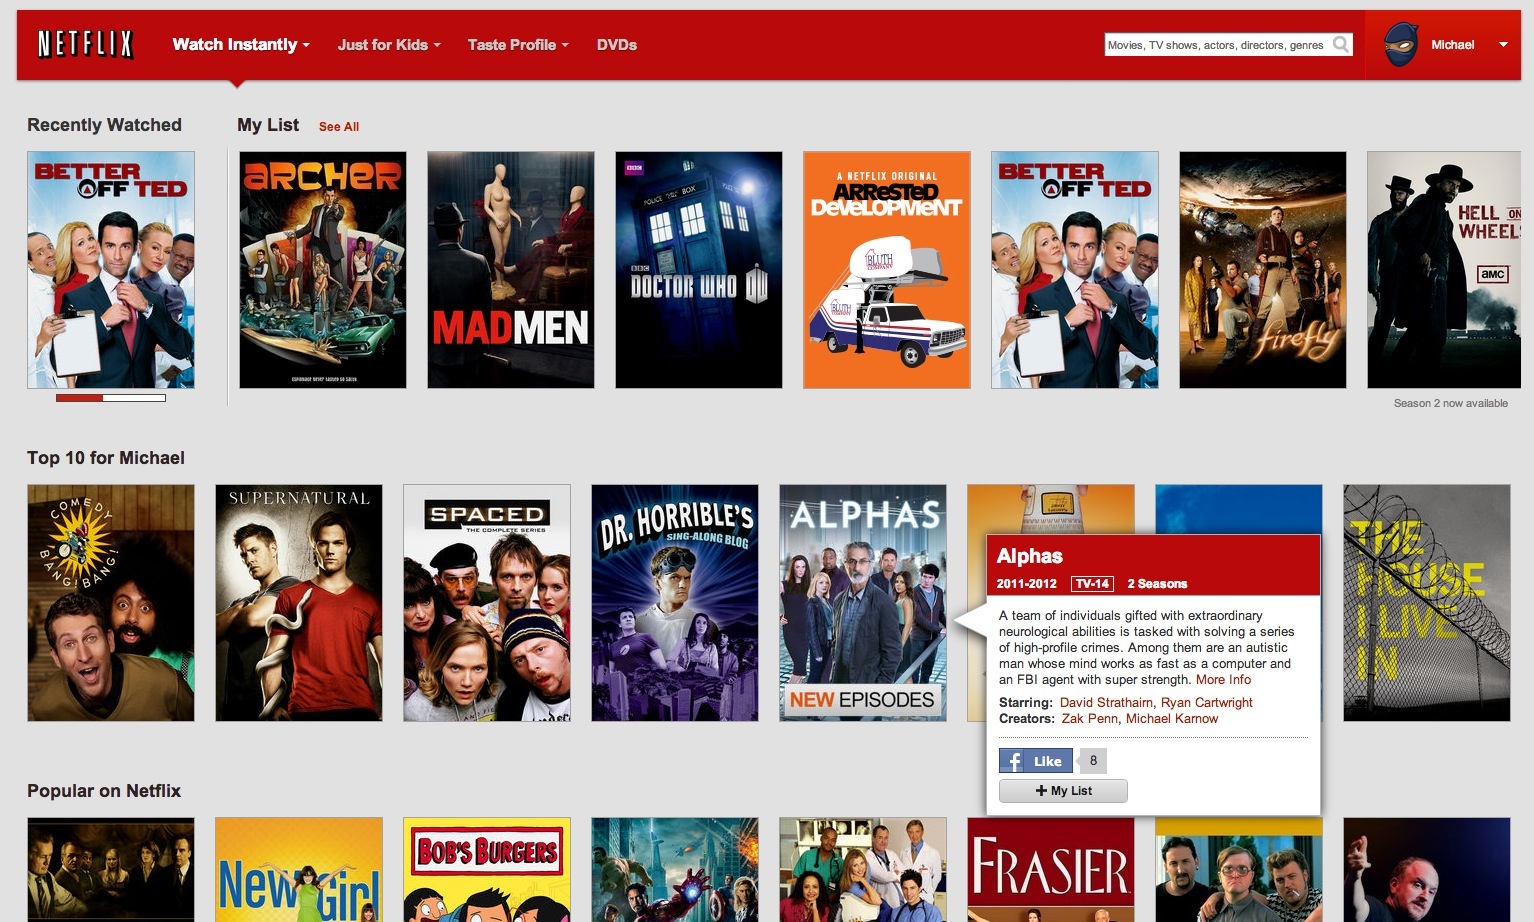 Netflix Unveils $7 Streaming Plan For SD Viewing